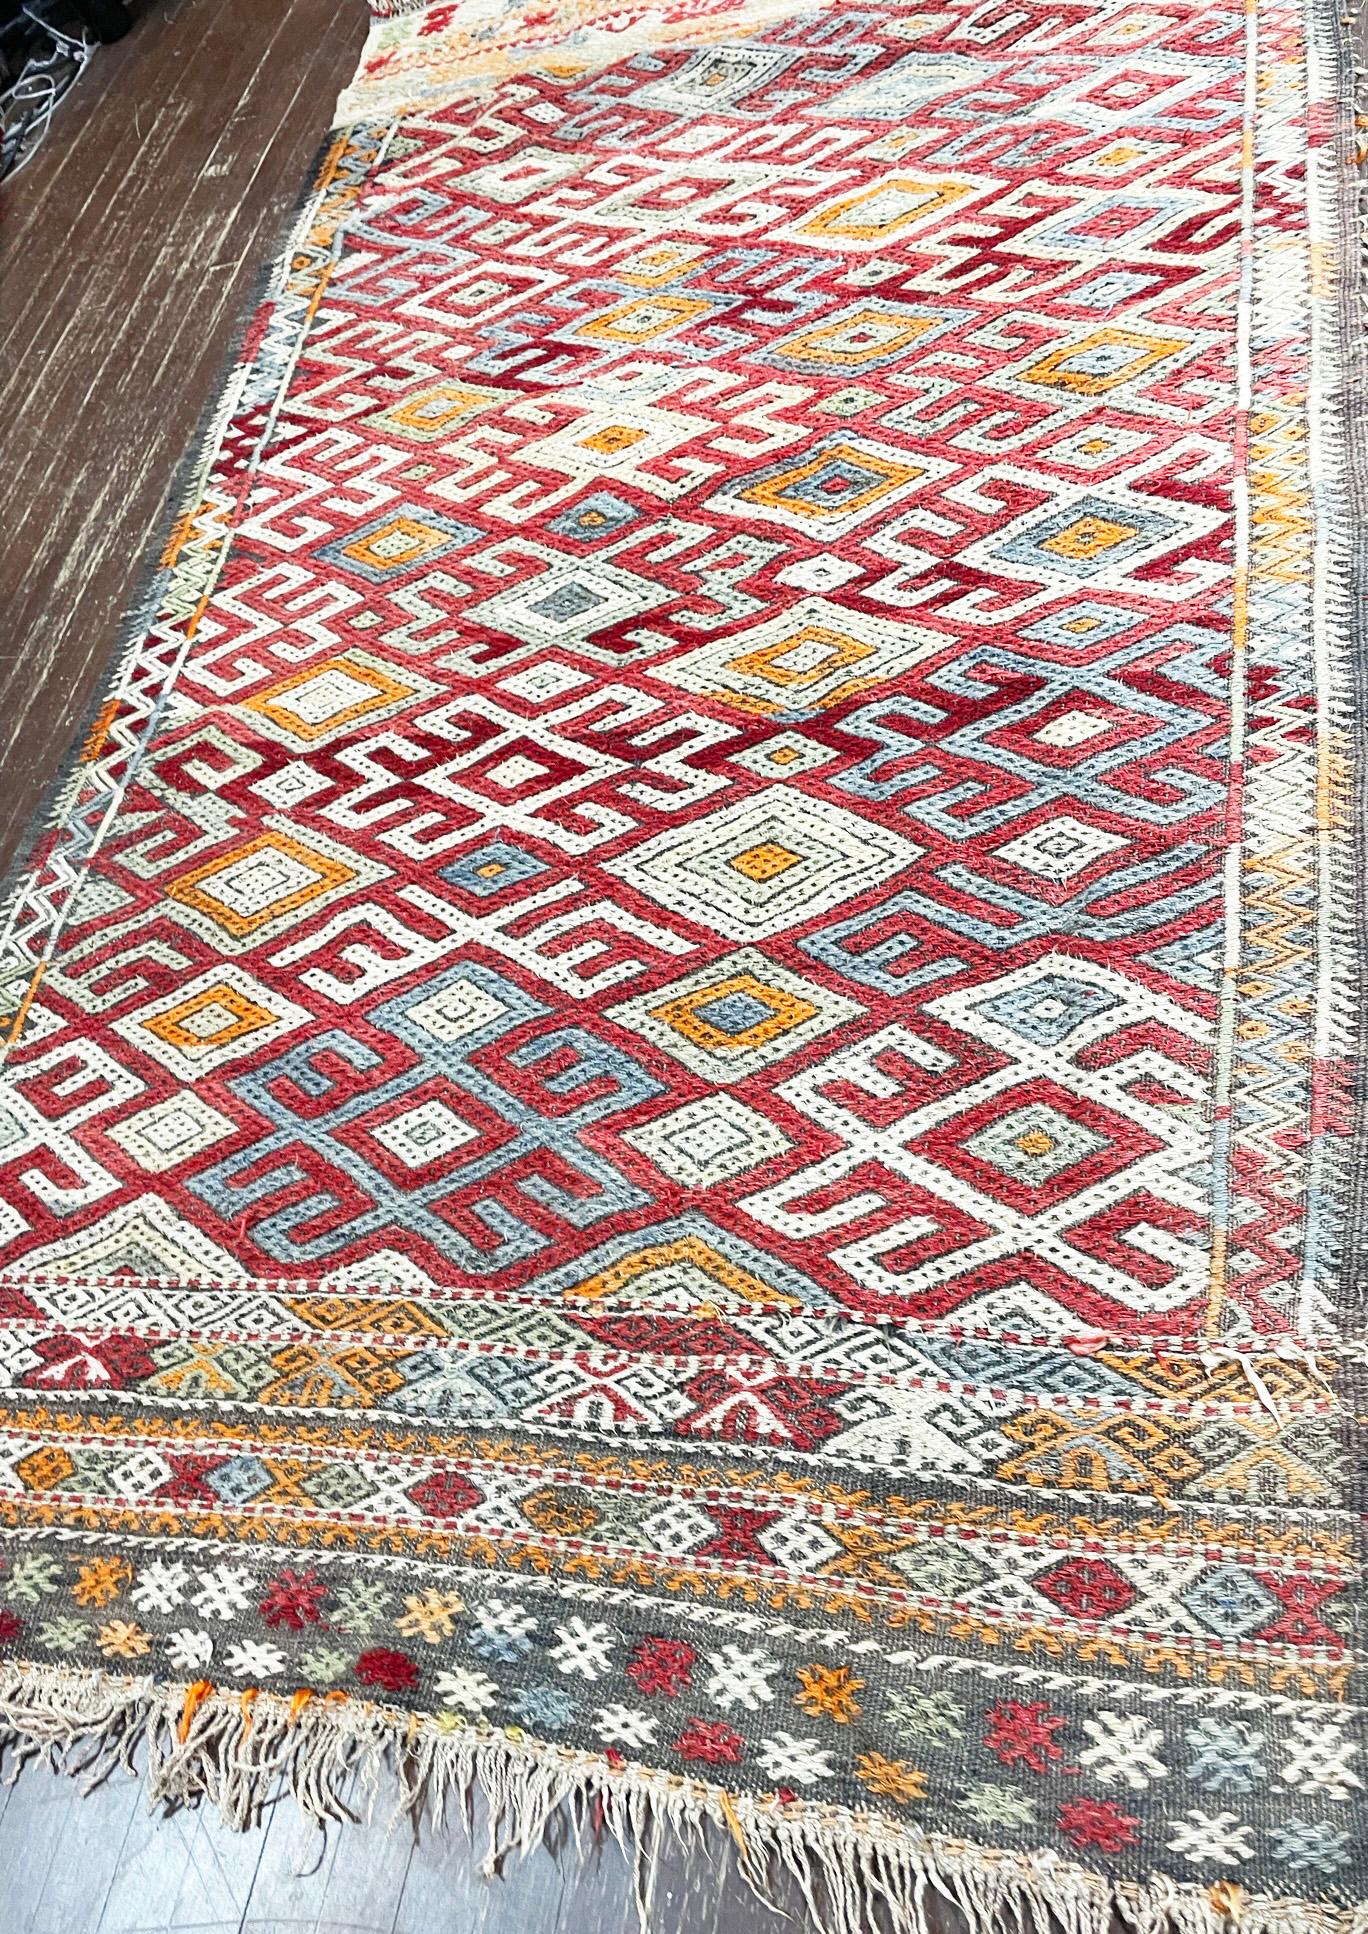 Vintage Moroccan Flat Weave/Kilim rug/runner, #17420, circa 1950s In Excellent Condition For Sale In Evanston, IL